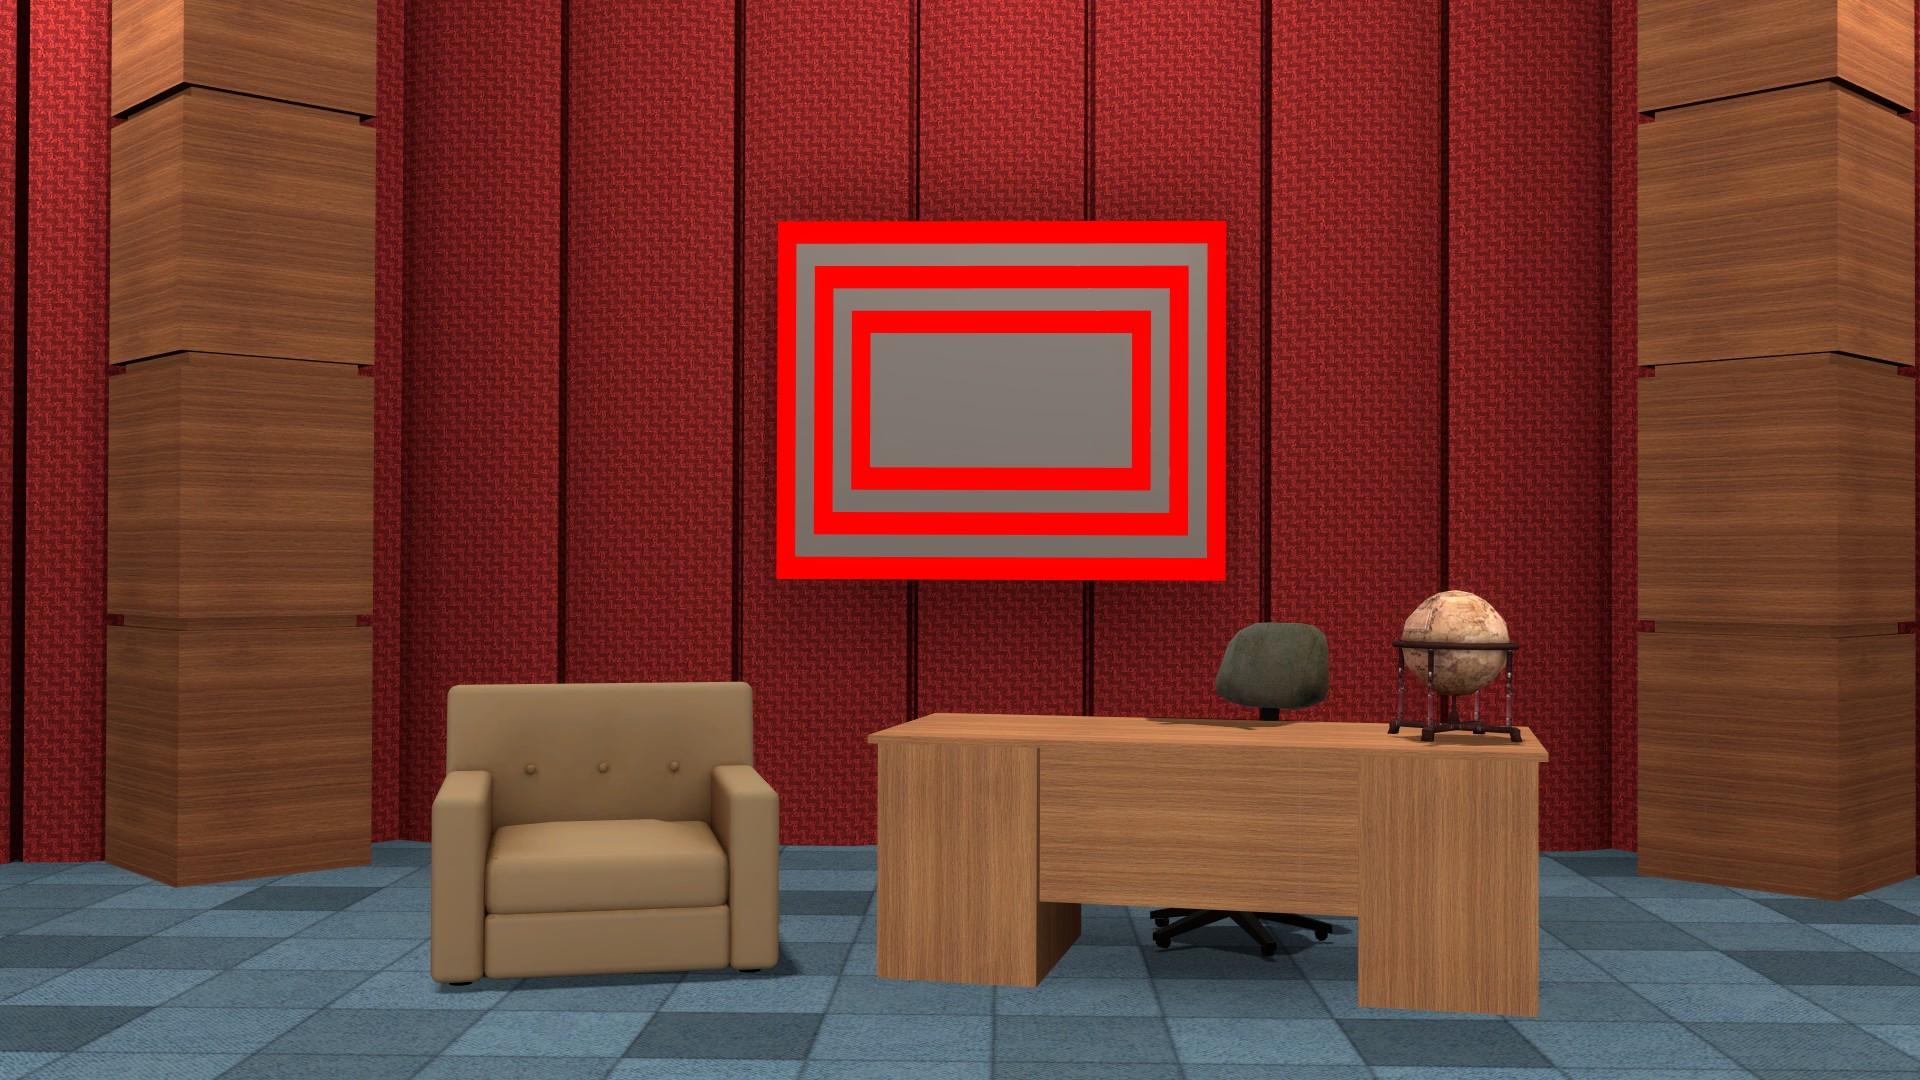 Steam Workshop - The Eric Andre Show Set